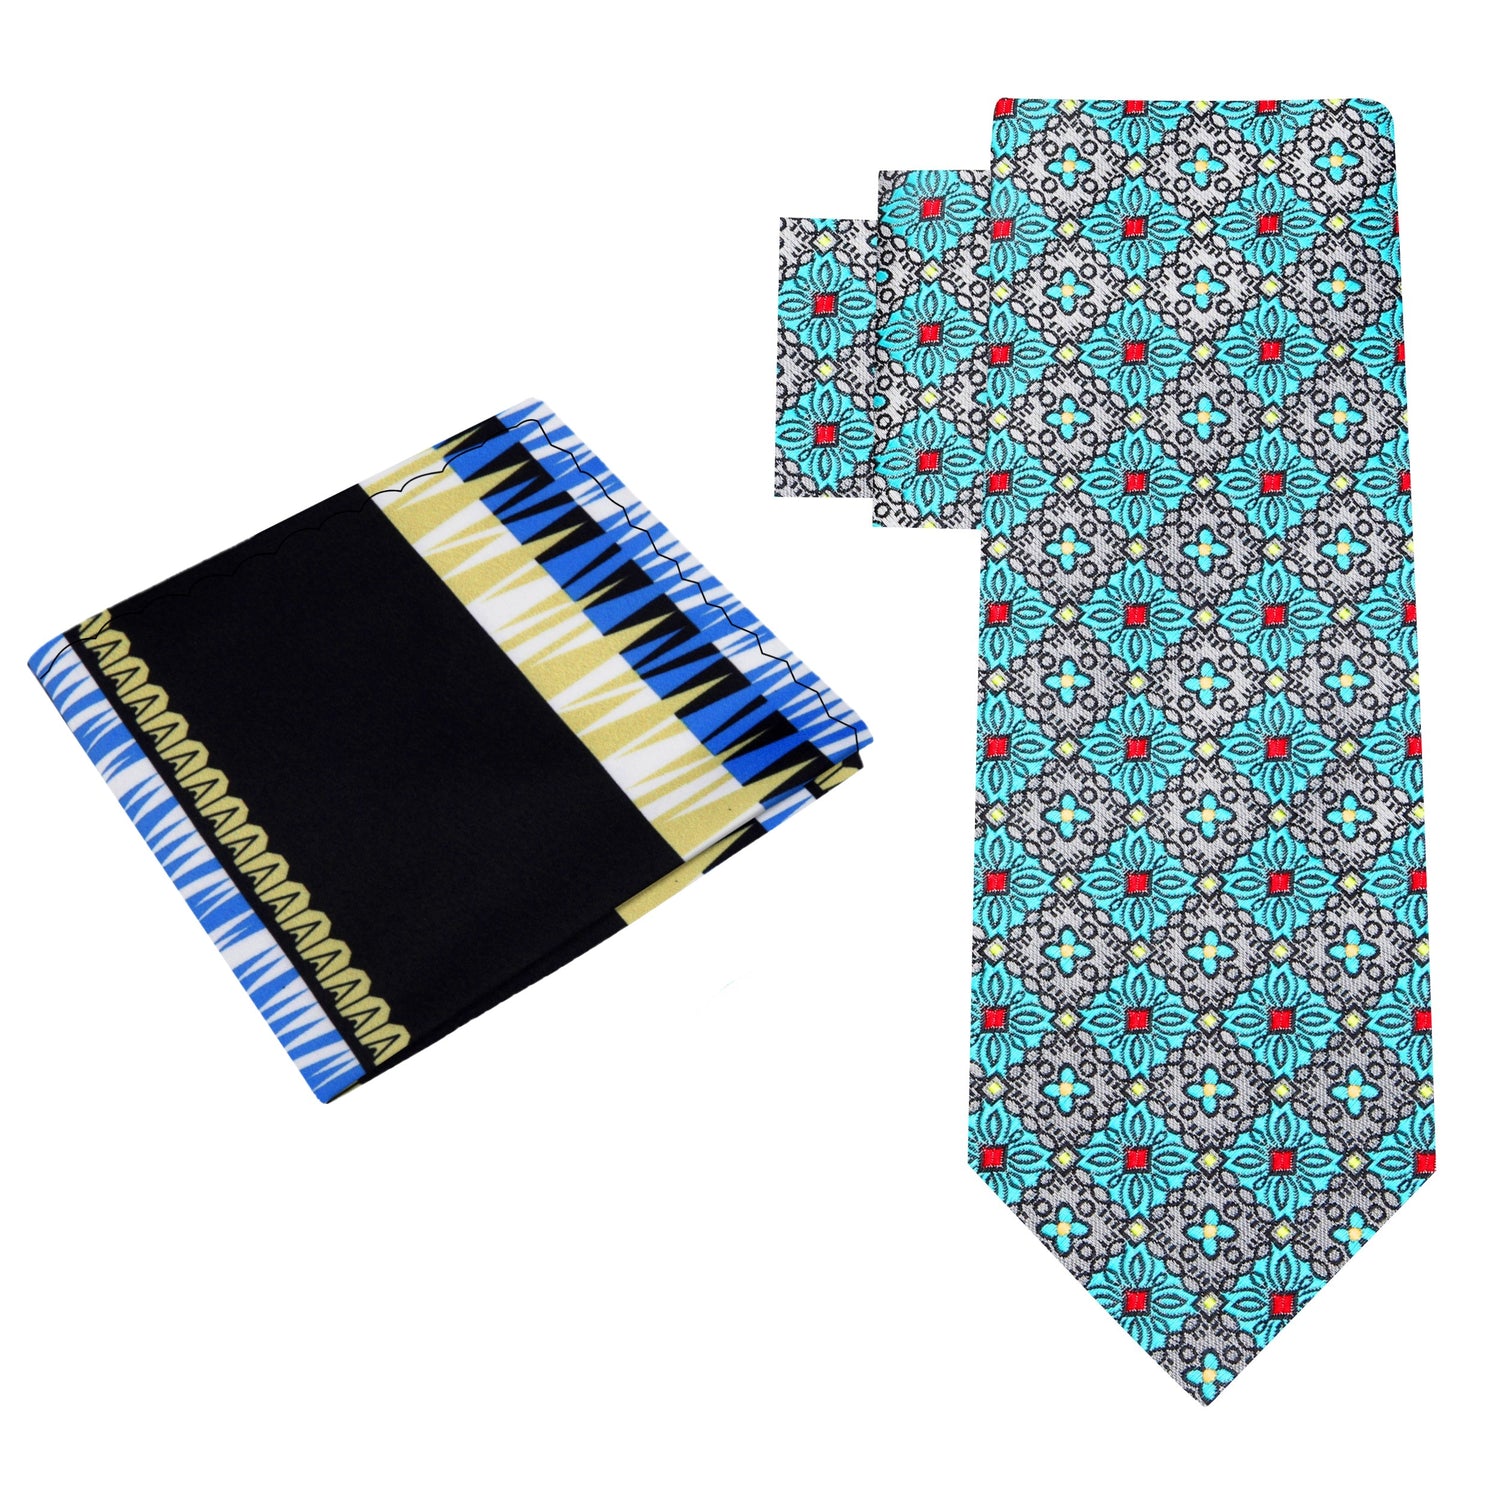 Alt View: Grey, Light Blue Geometric Necktie and Accenting Black Abstract Square